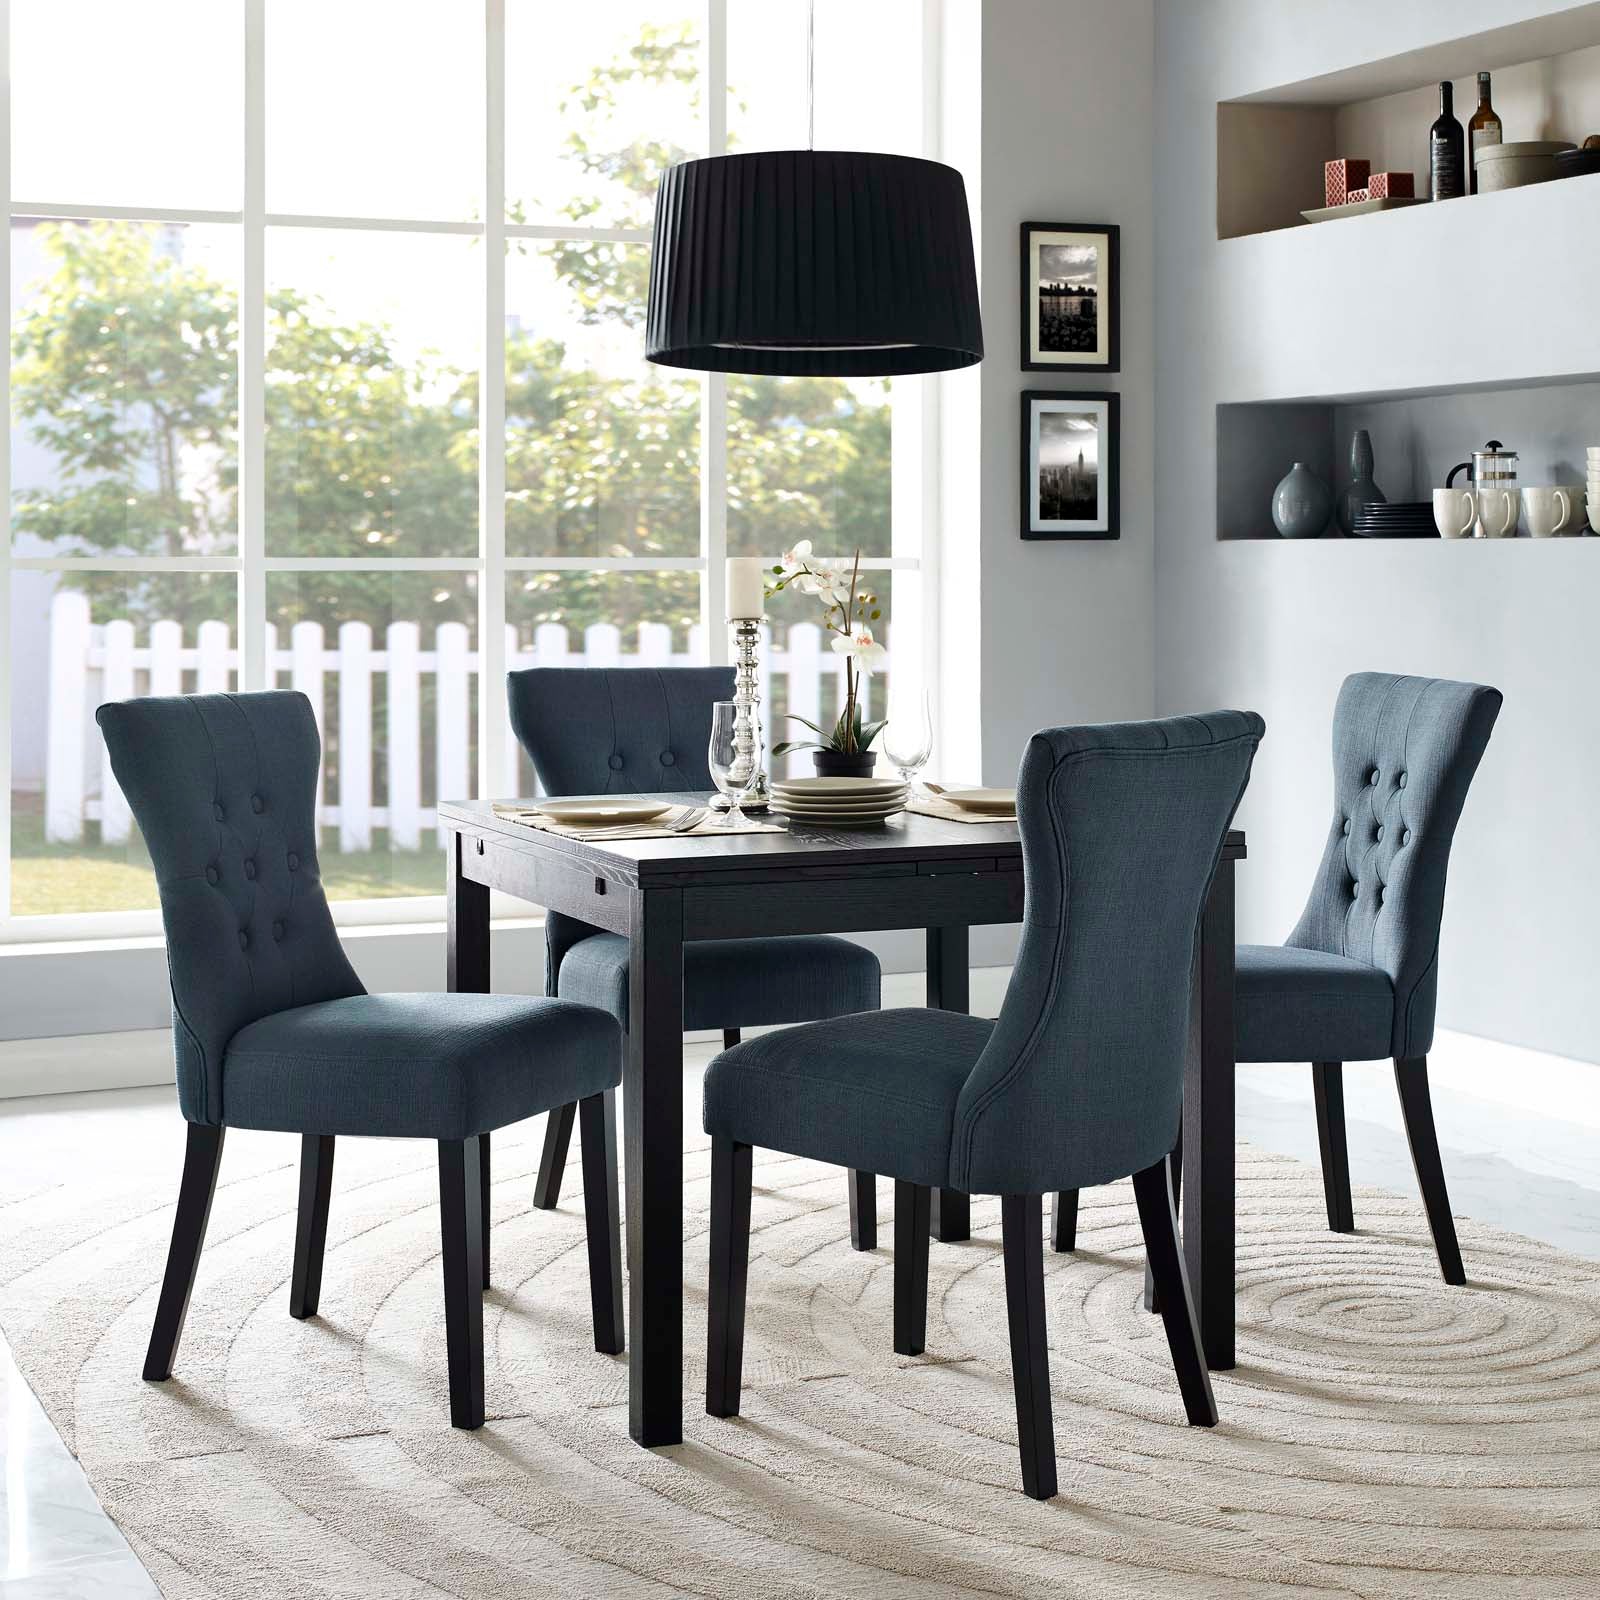 Silhouette Dining Side Chairs Upholstered Fabric Set of 4 - East Shore Modern Home Furnishings